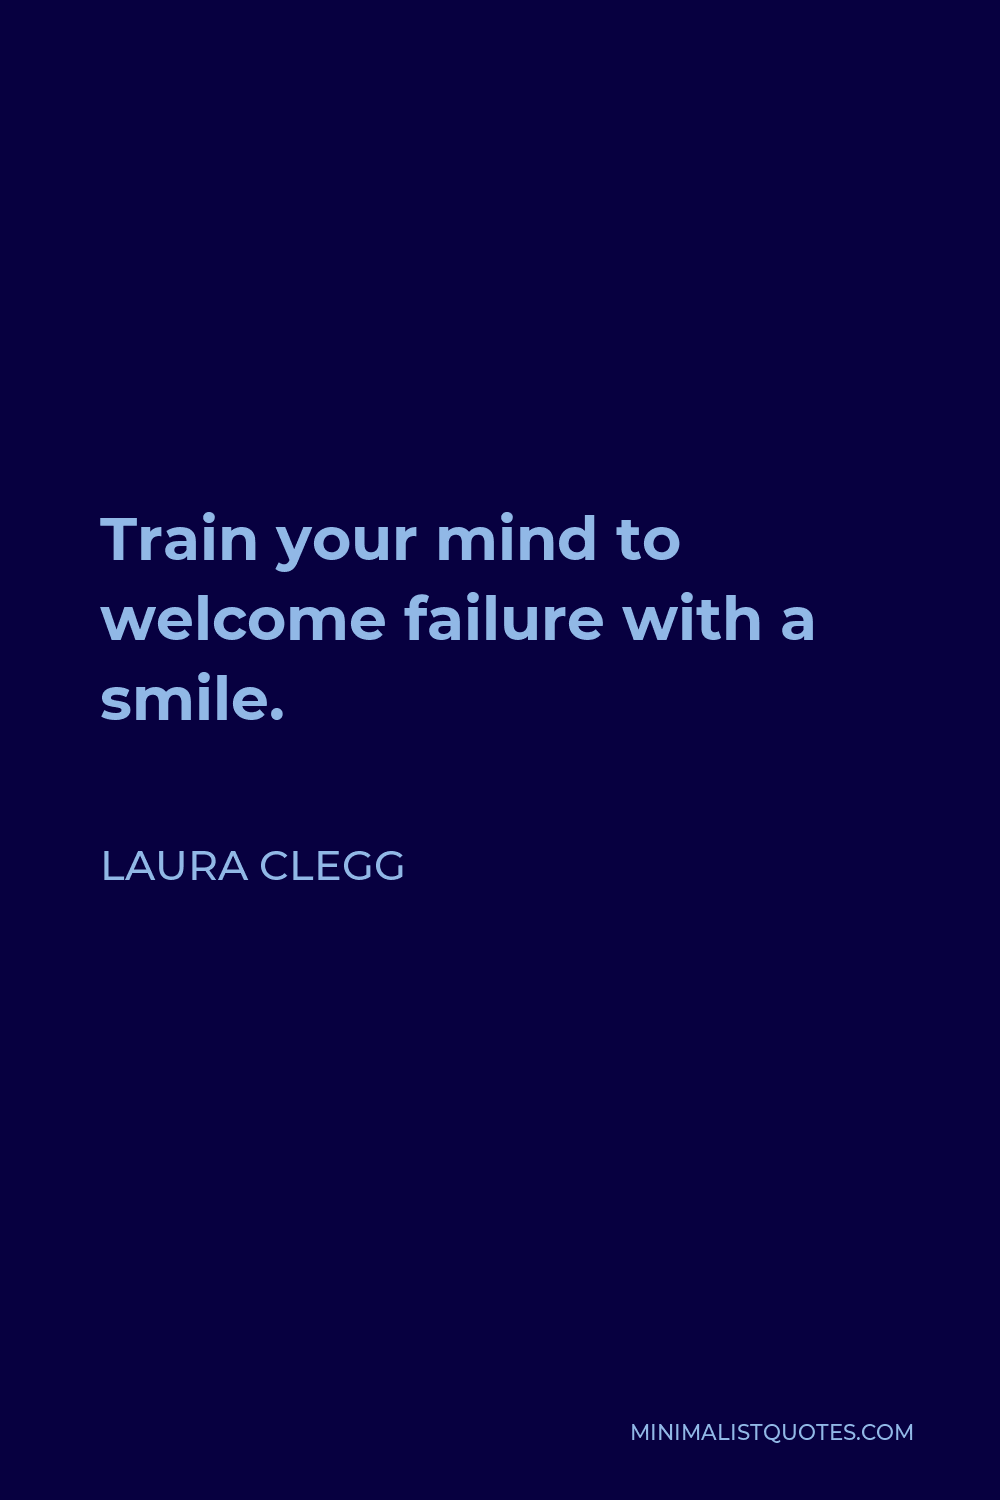 Laura Clegg Quote - Train your mind to welcome failure with a smile.